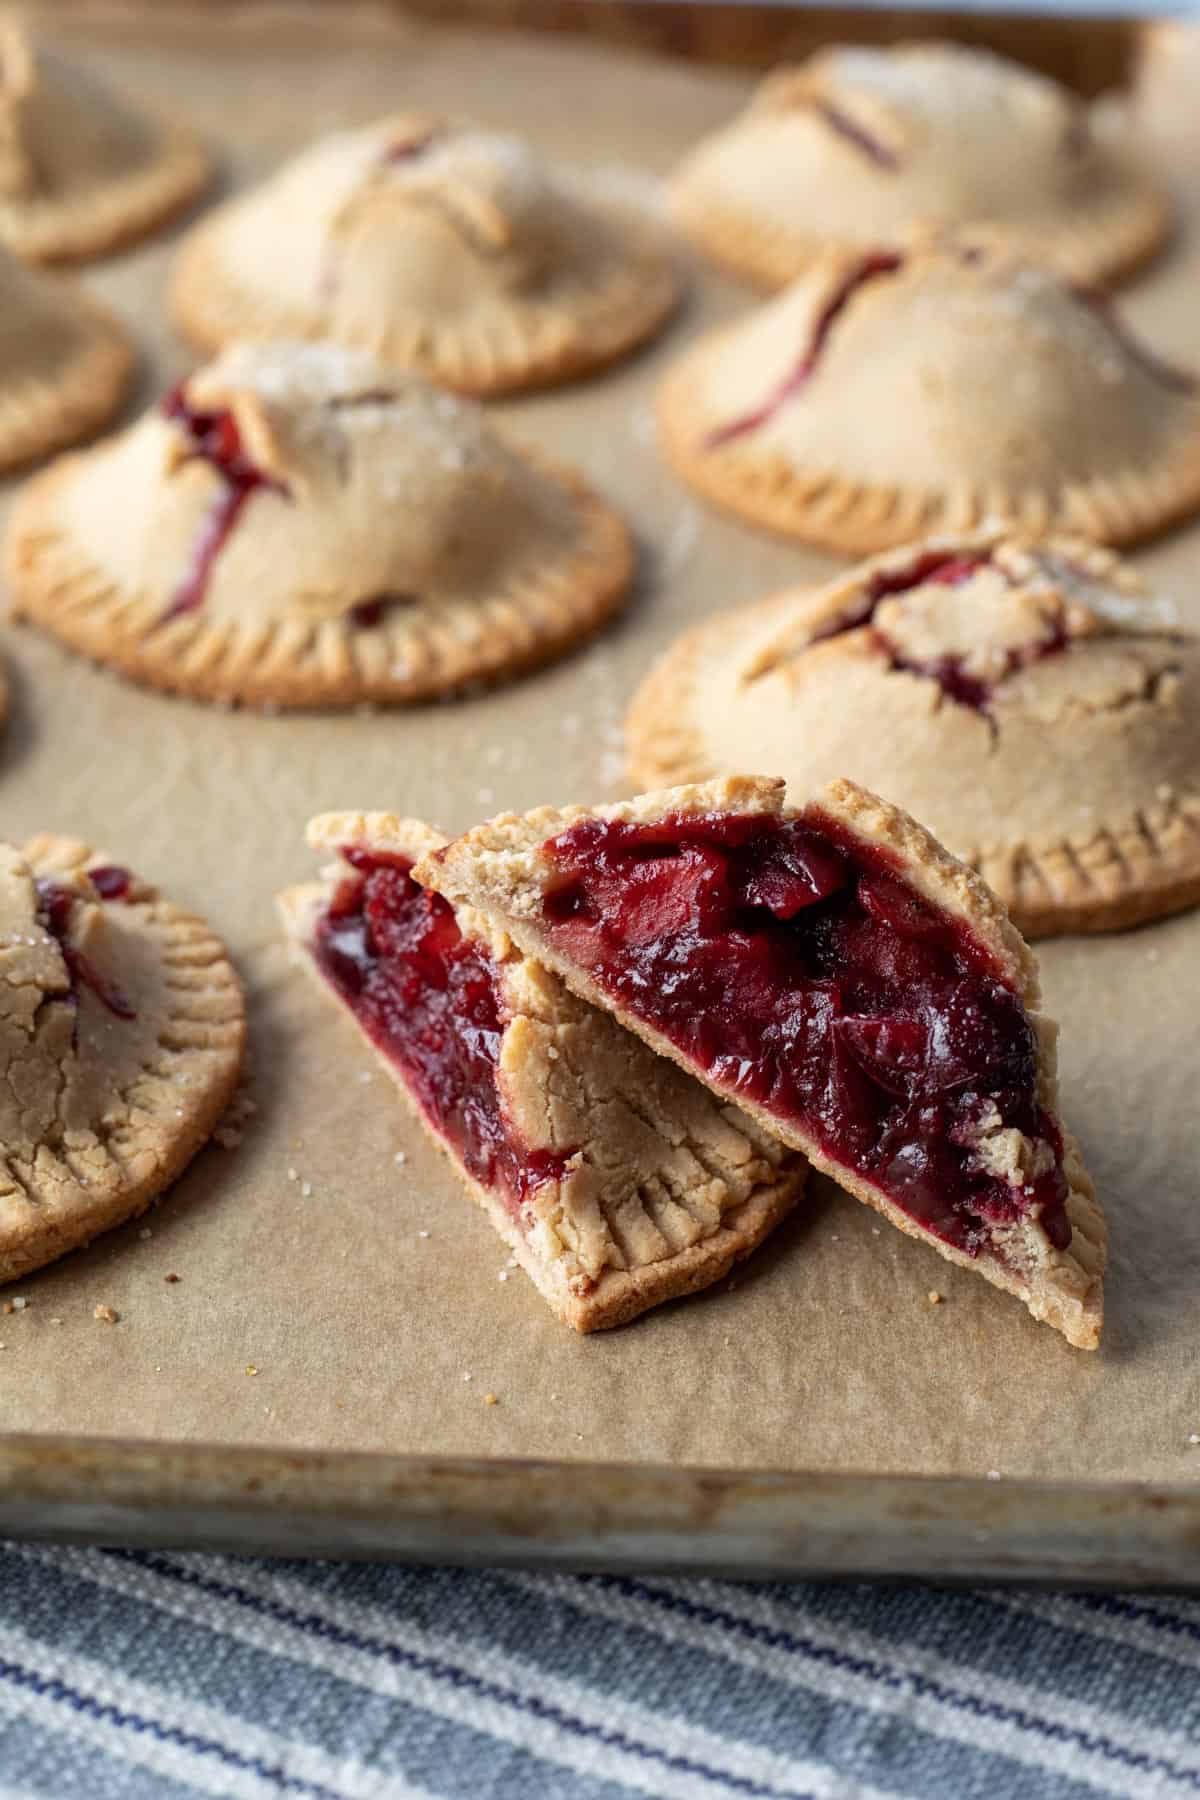 a cranberry hand pie cut in half to show filling inside.